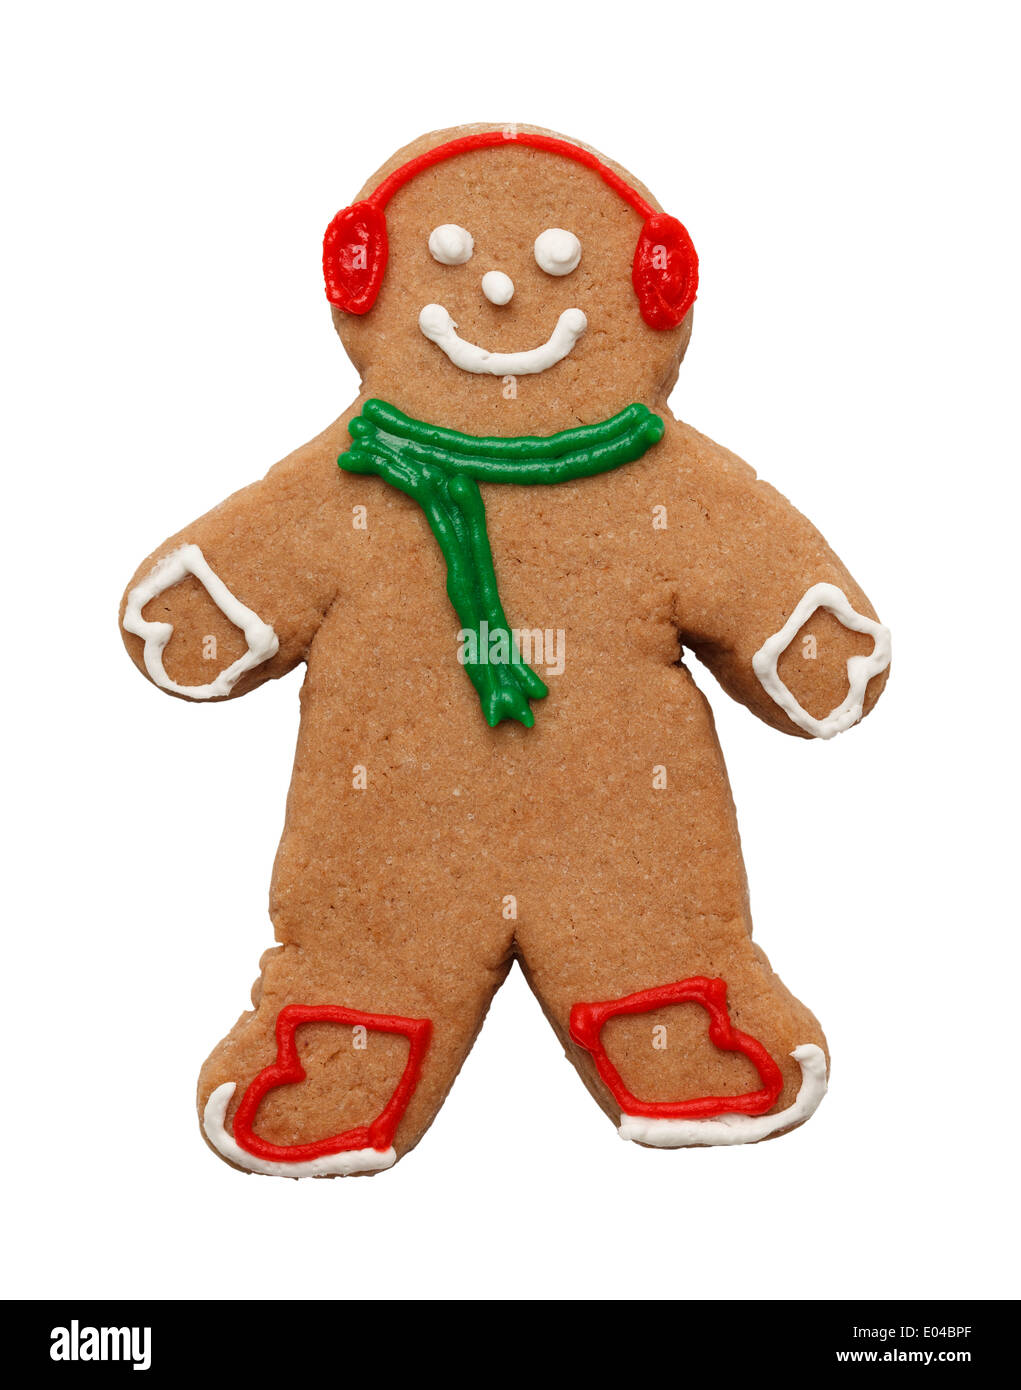 Gingerbread Cookie With Winter Christmas Descoration Isolated on White Background. Stock Photo